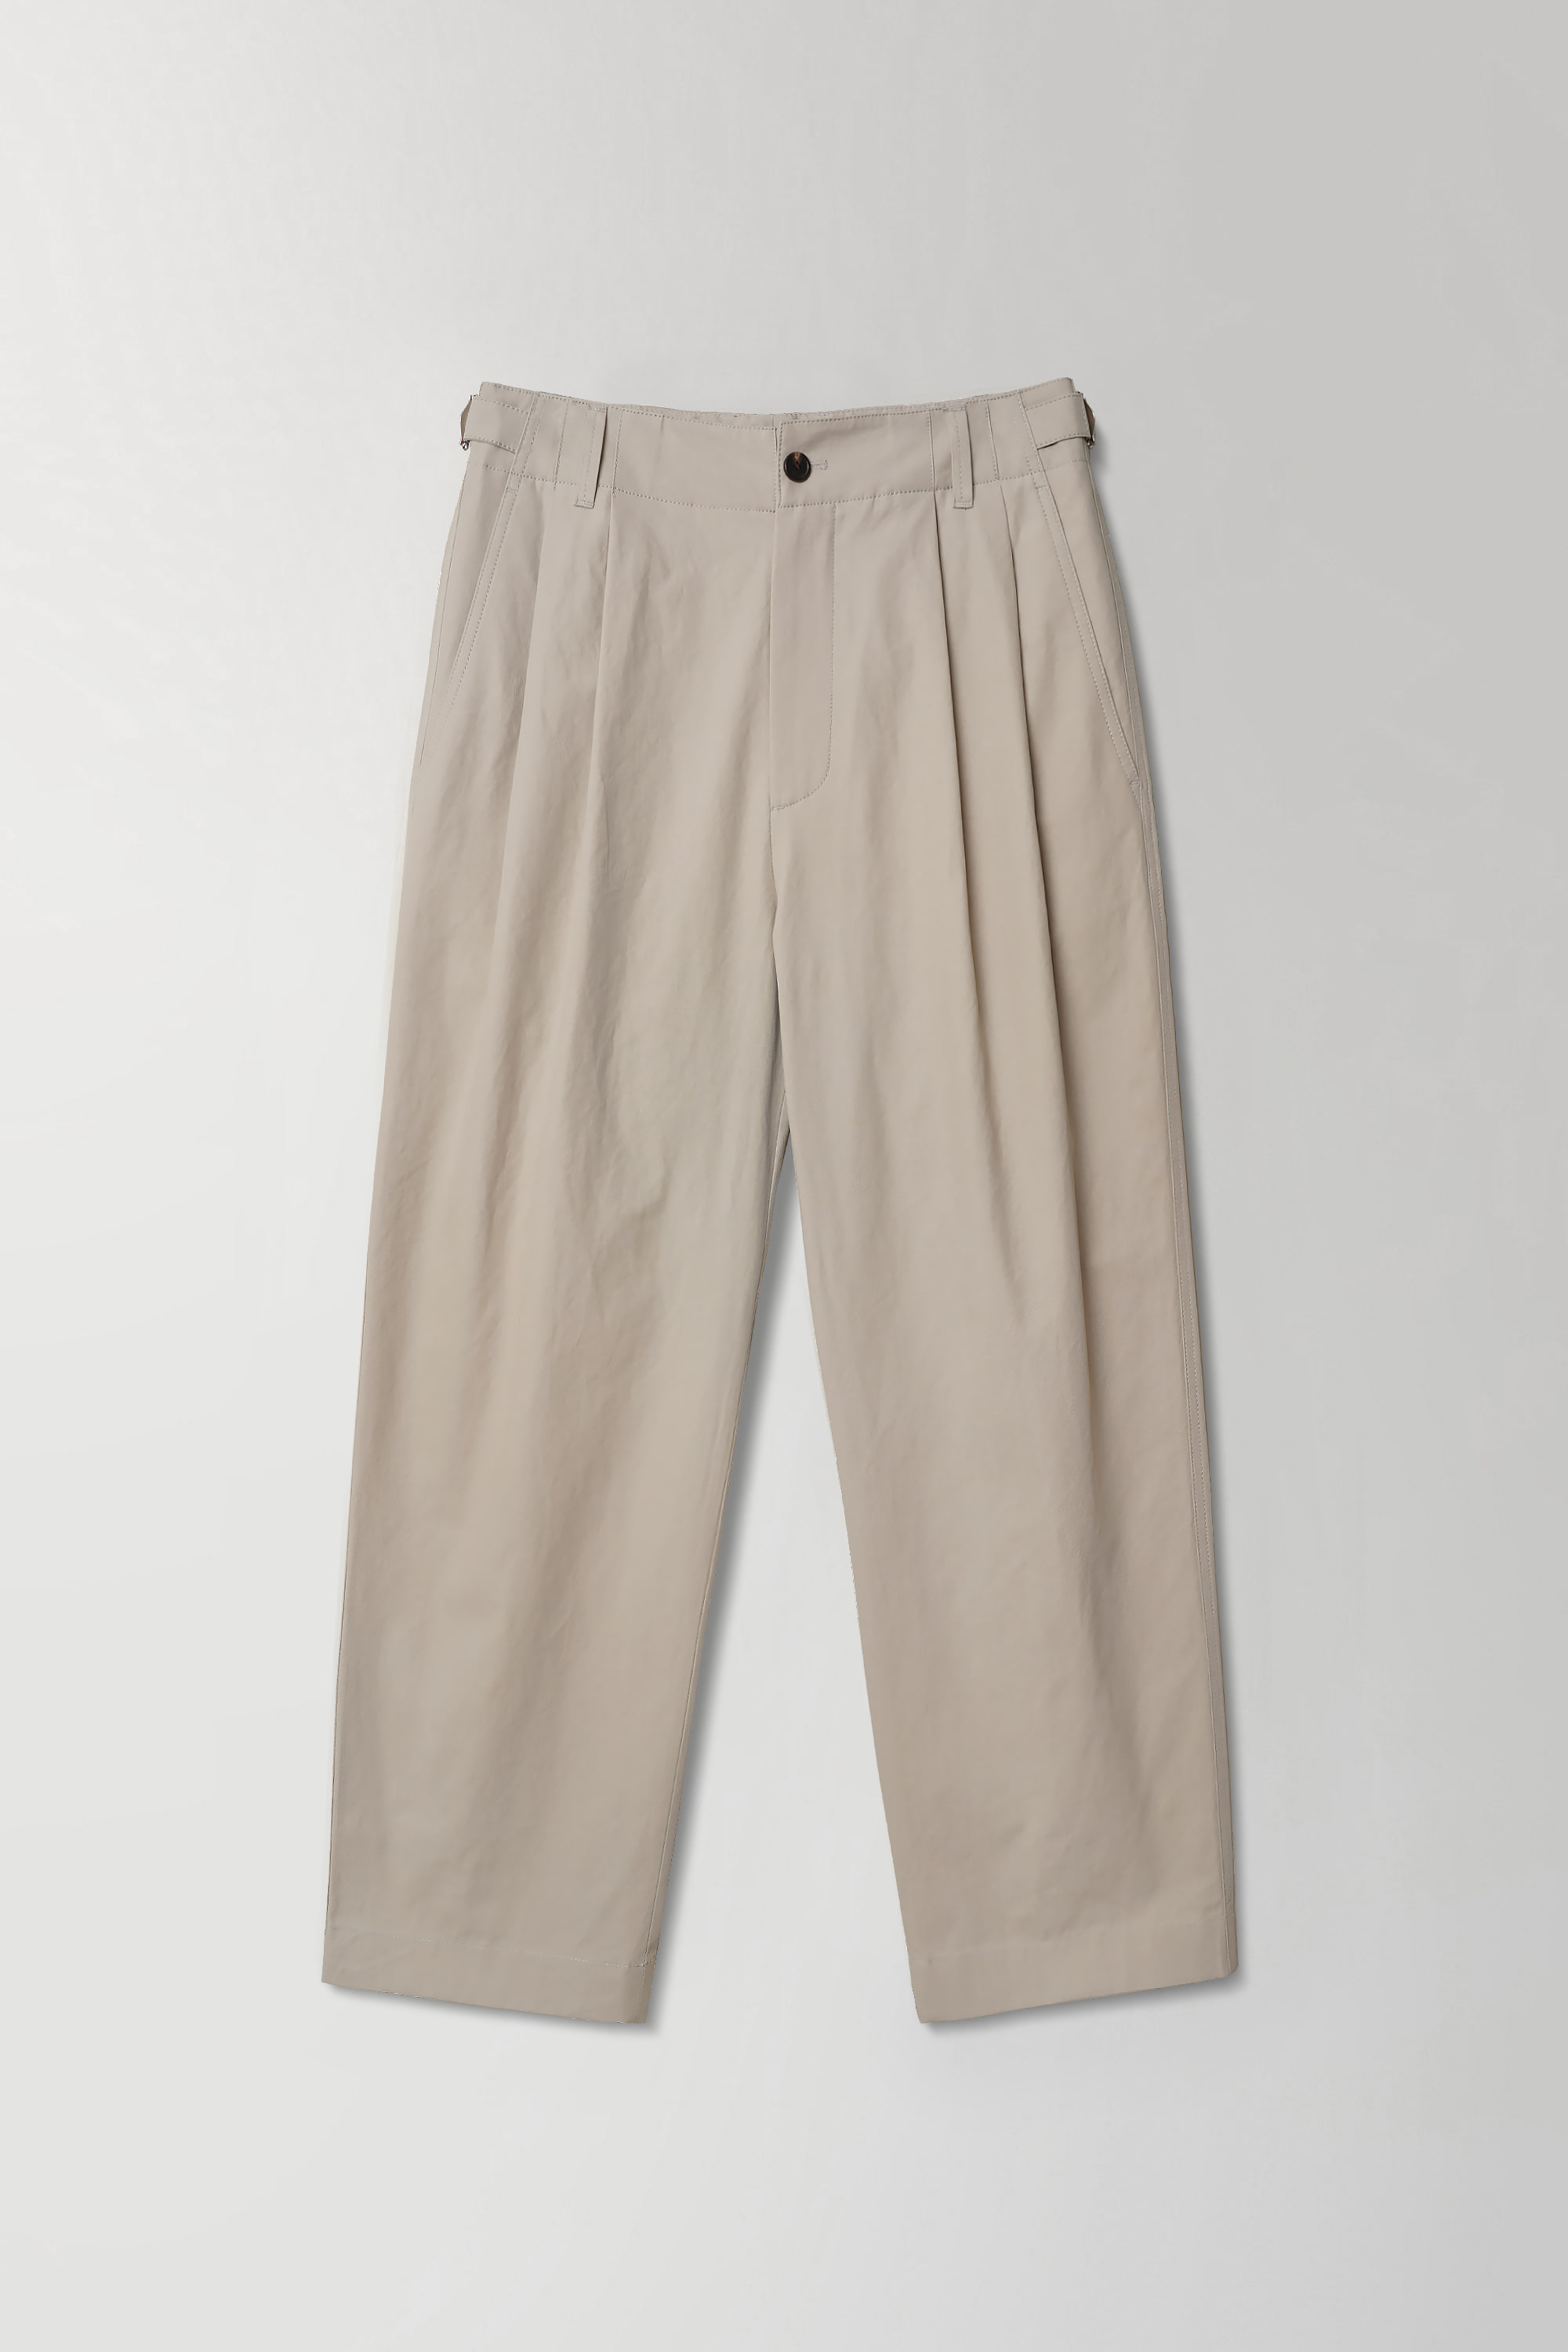 [4TH] TRAVELLER CHINO PANTS (TYPE2) - SAND BEIGE